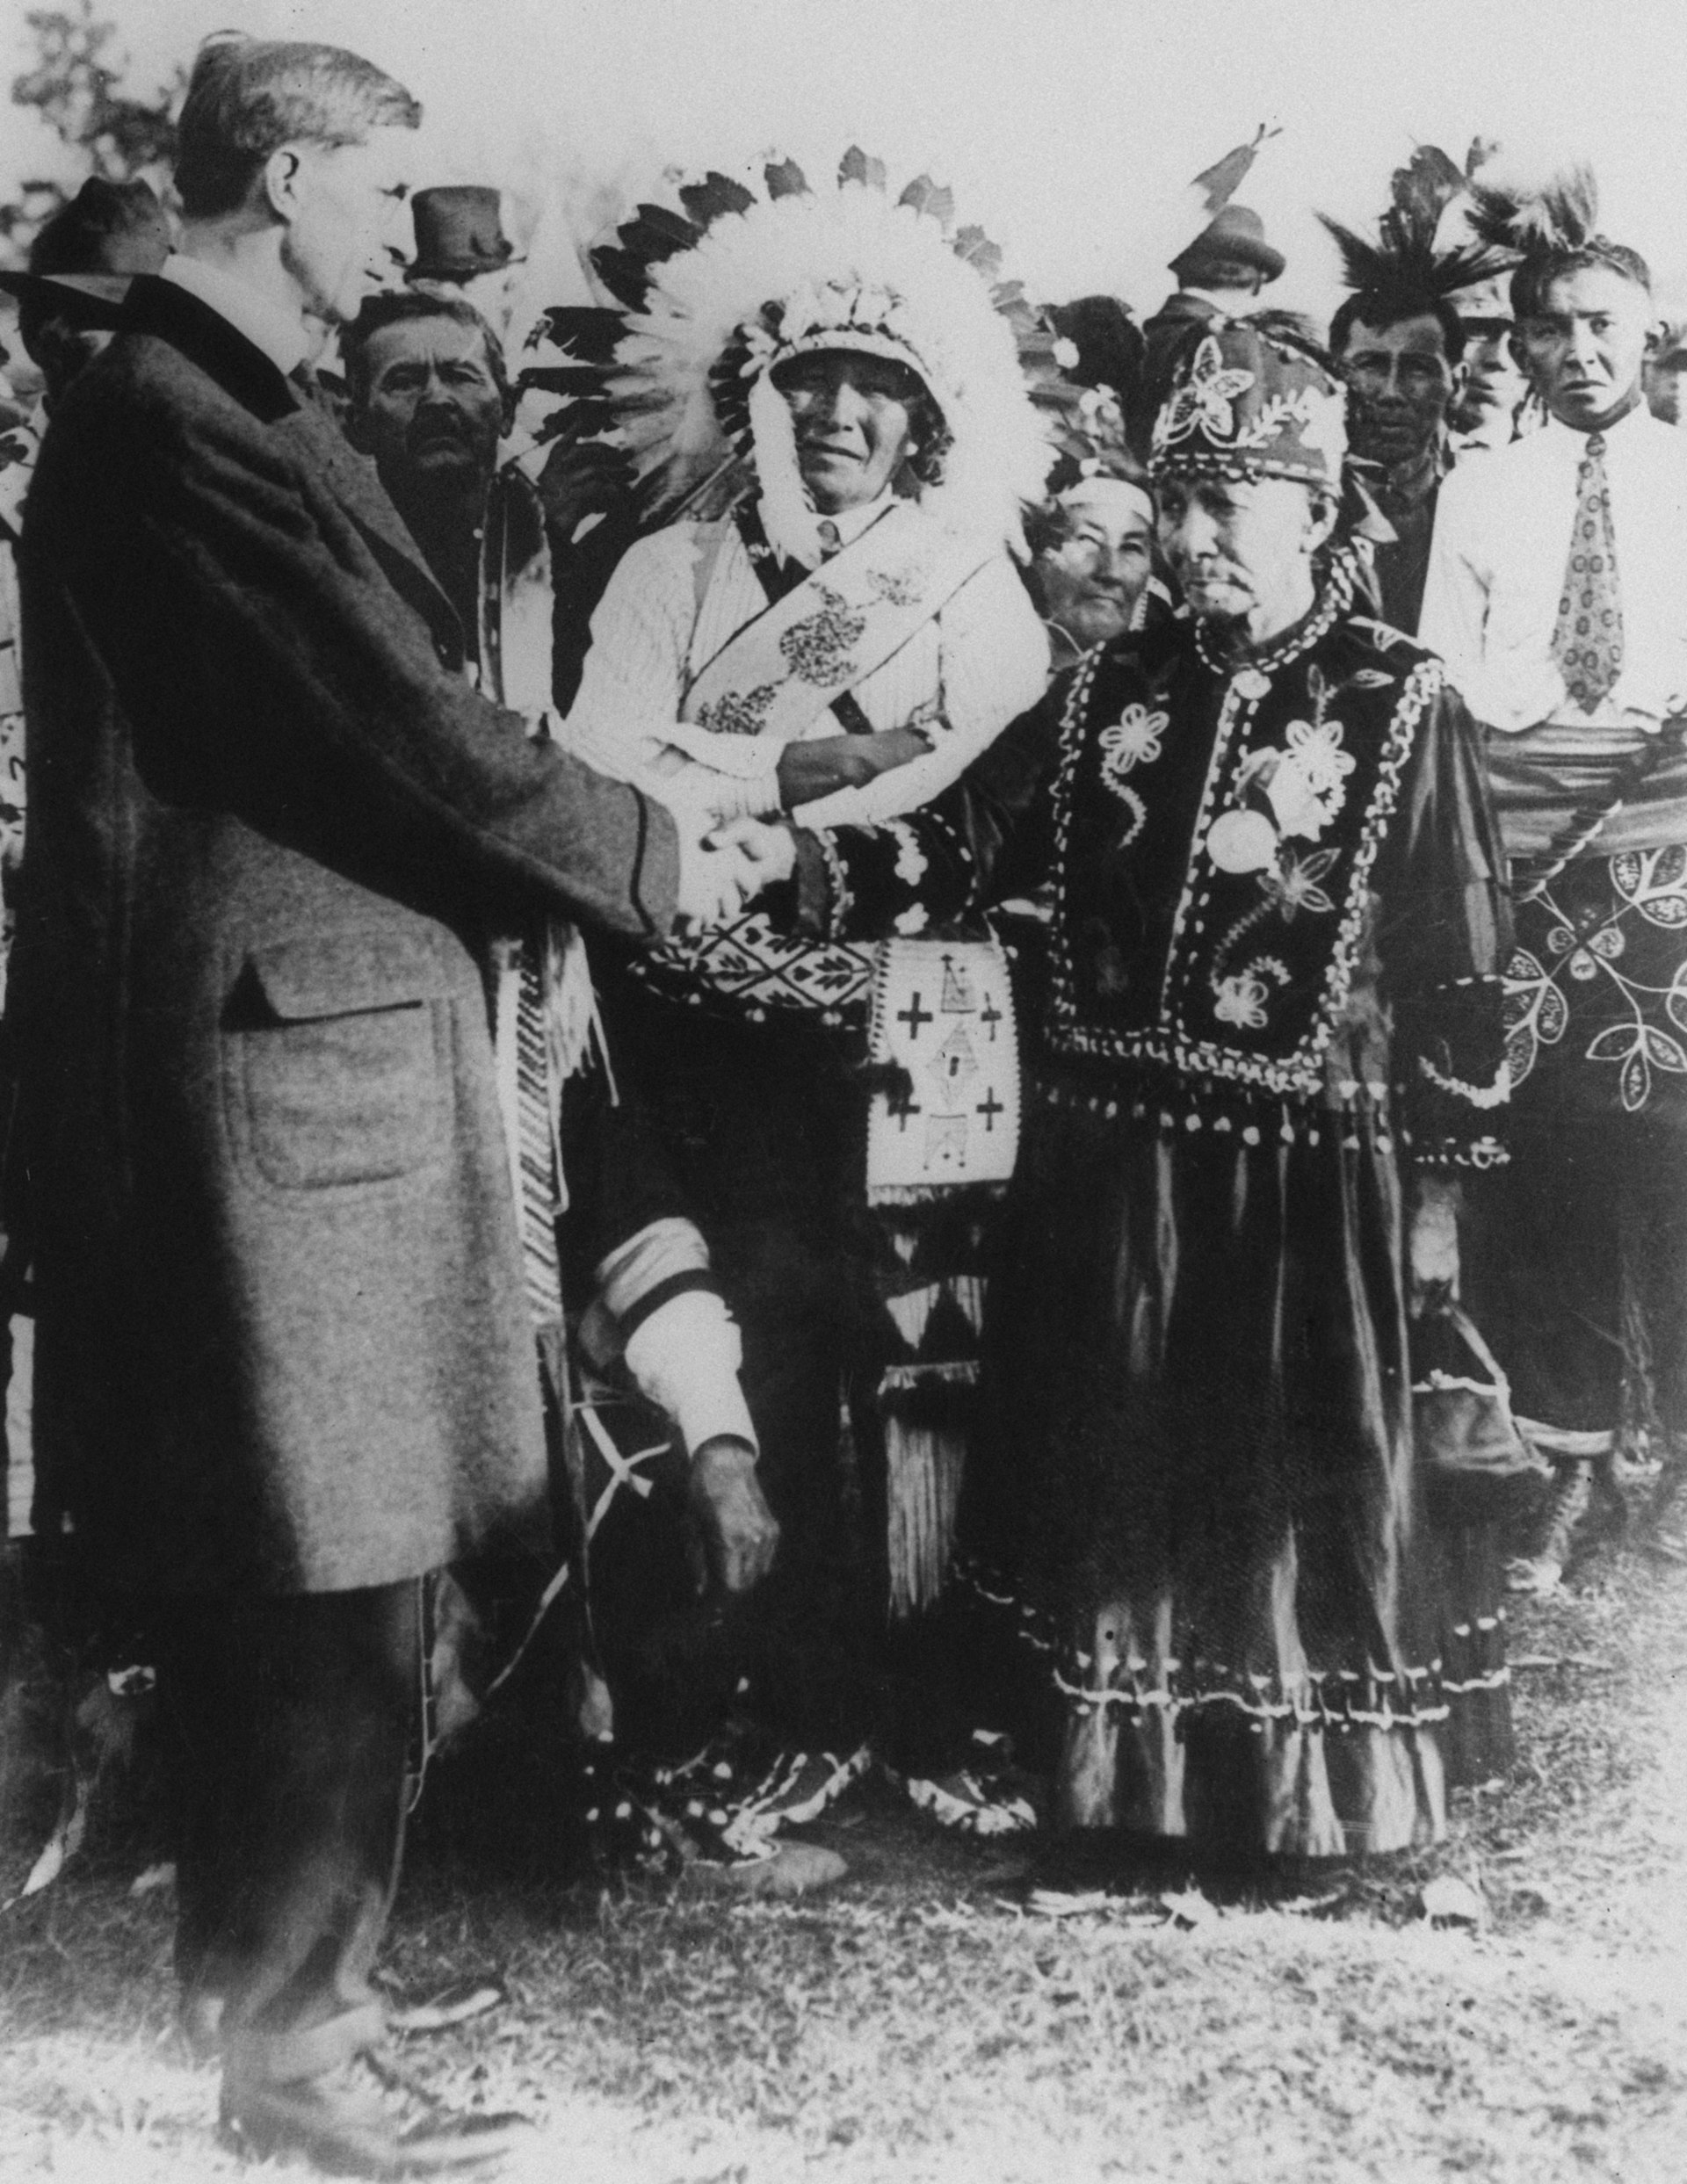 Irish politician and president of Dail Eireann, Eamon de Valera shakes hands with Native Americans during a visit to the USA, 1919